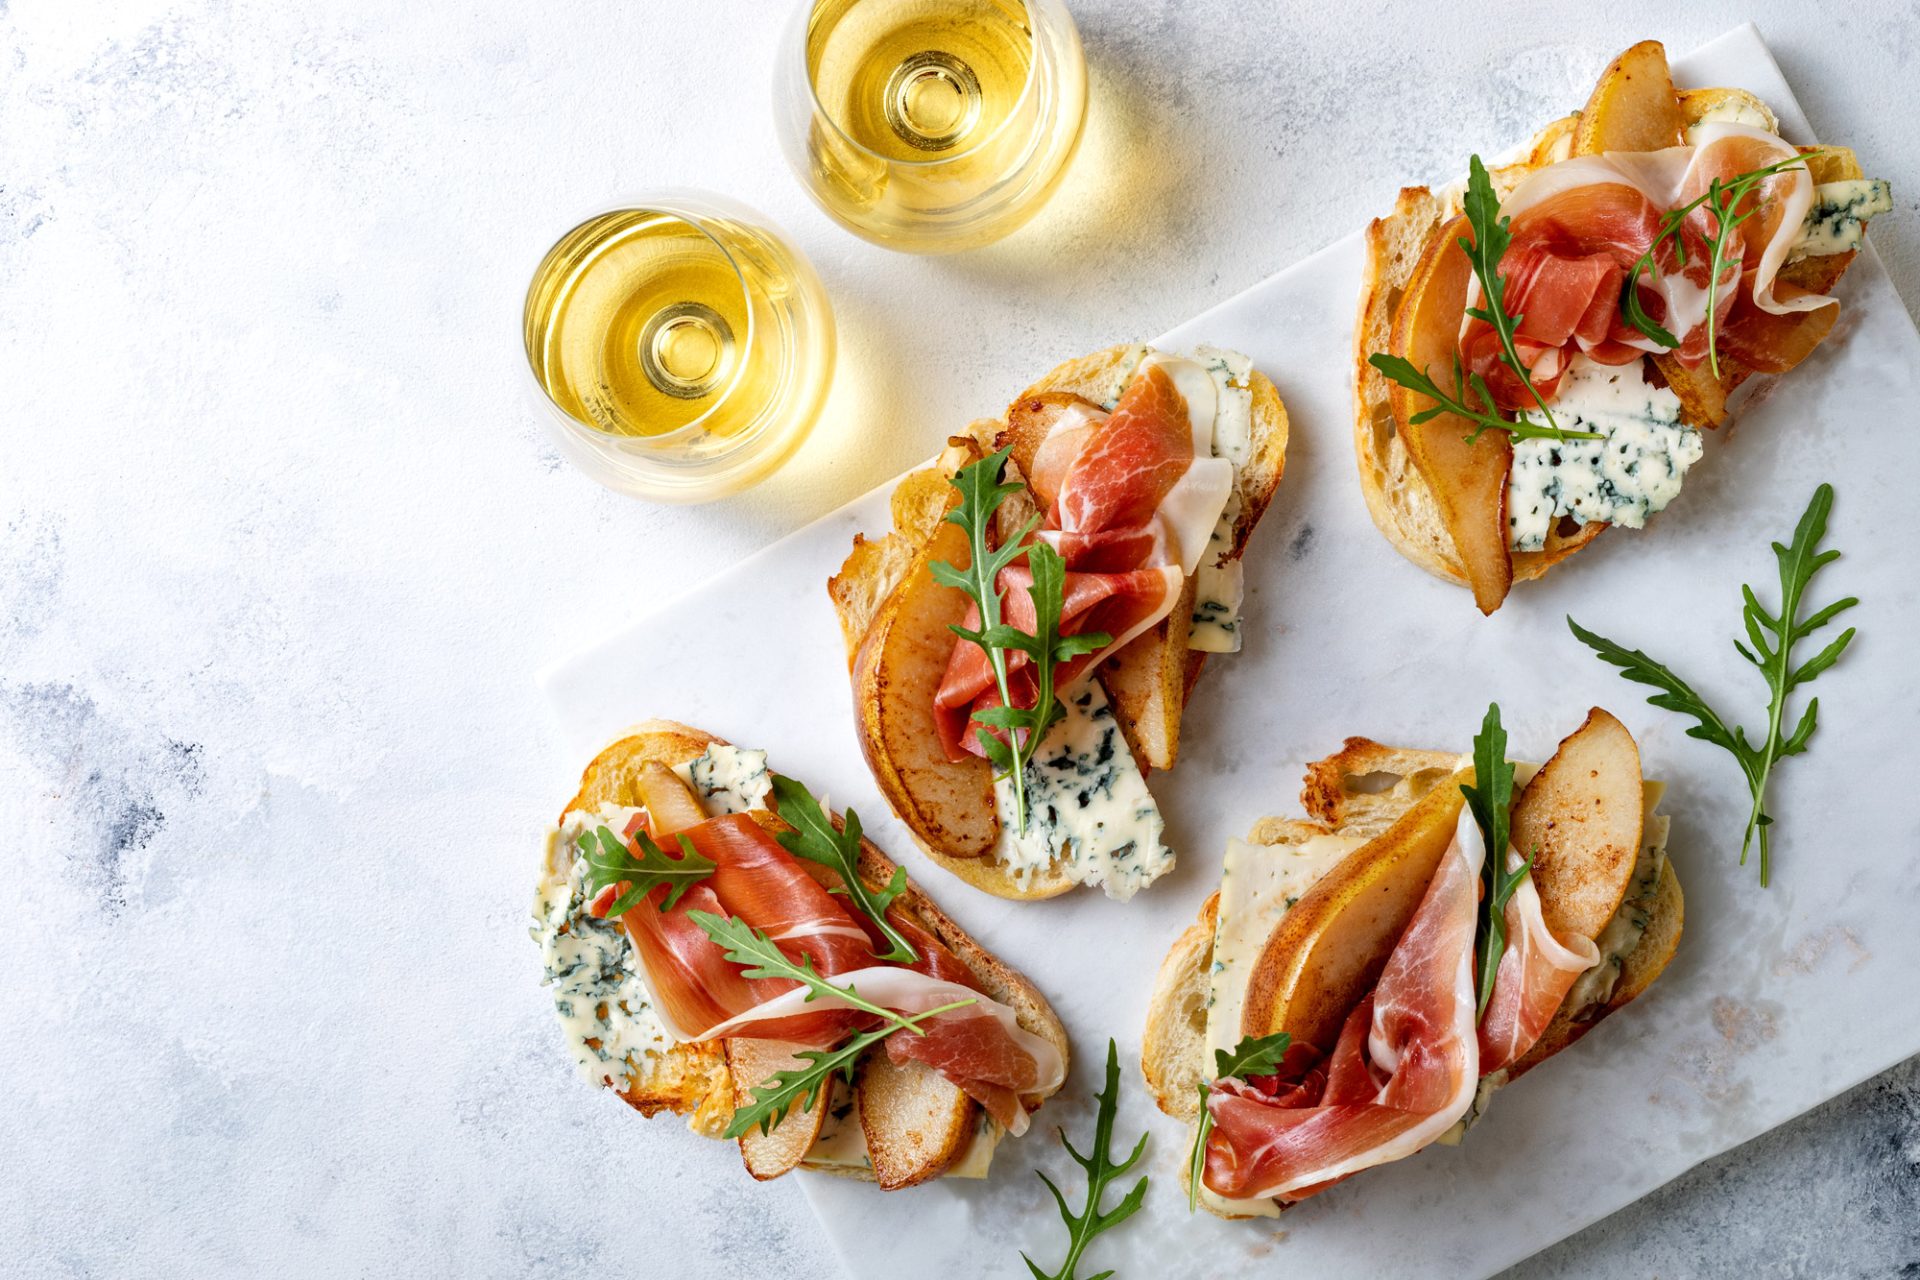 Sandwiches with wine